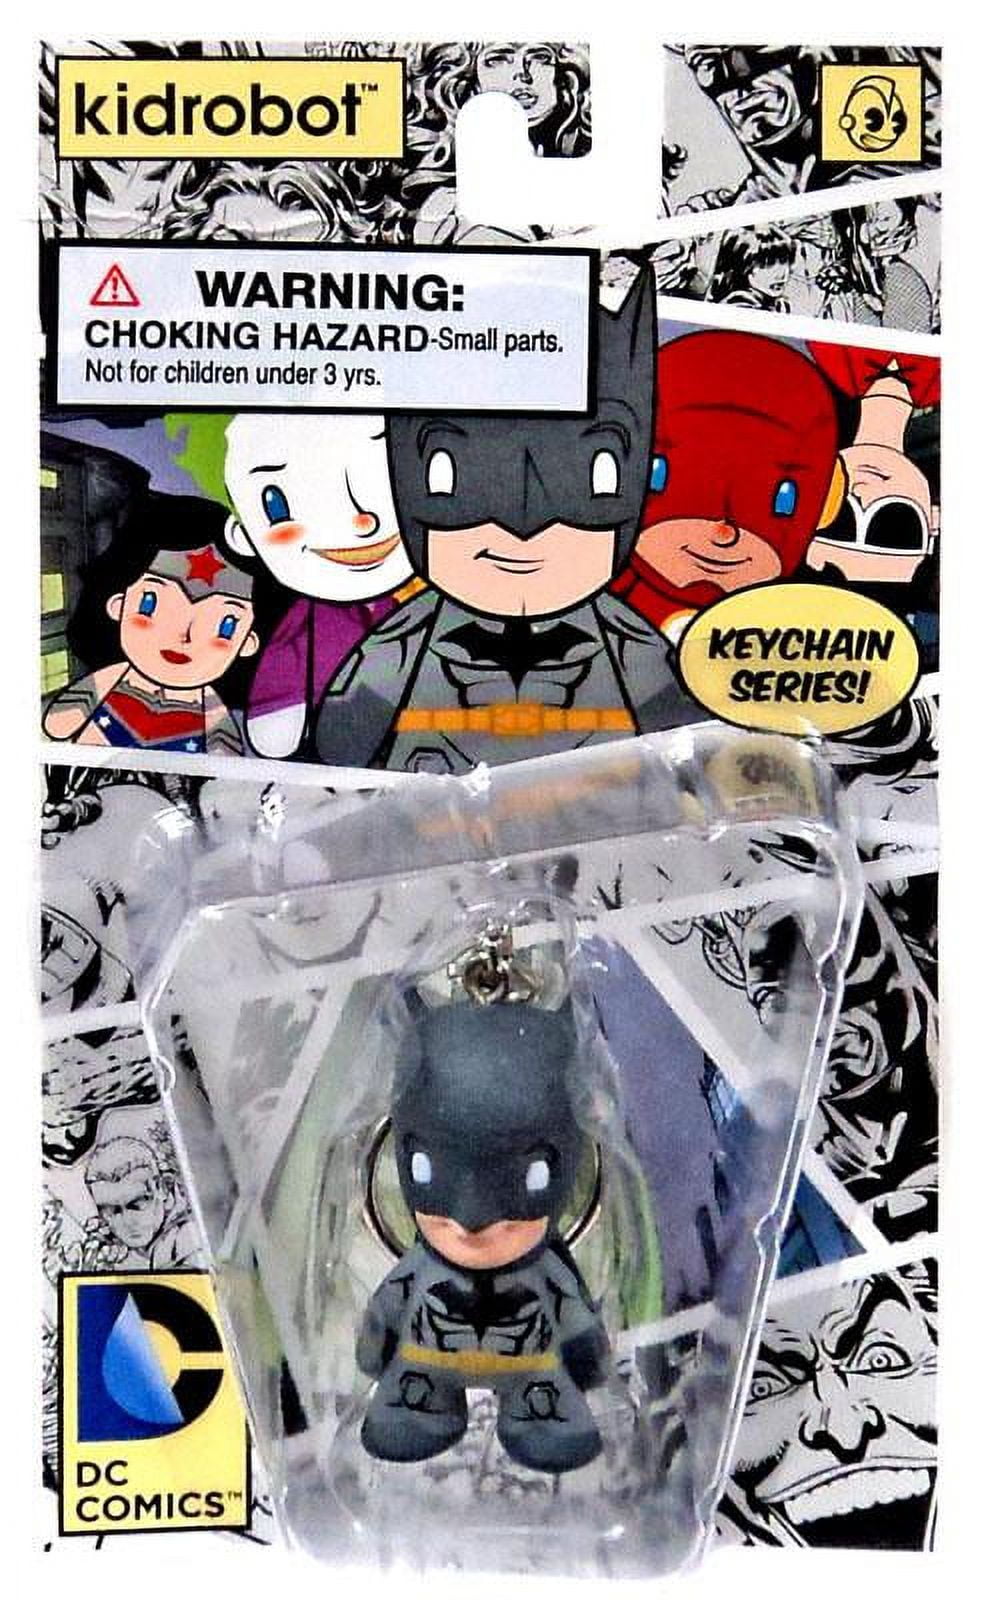 Rubber Small Cartoon Keychains of Spiderman Batman and Minion keychains for  Kids